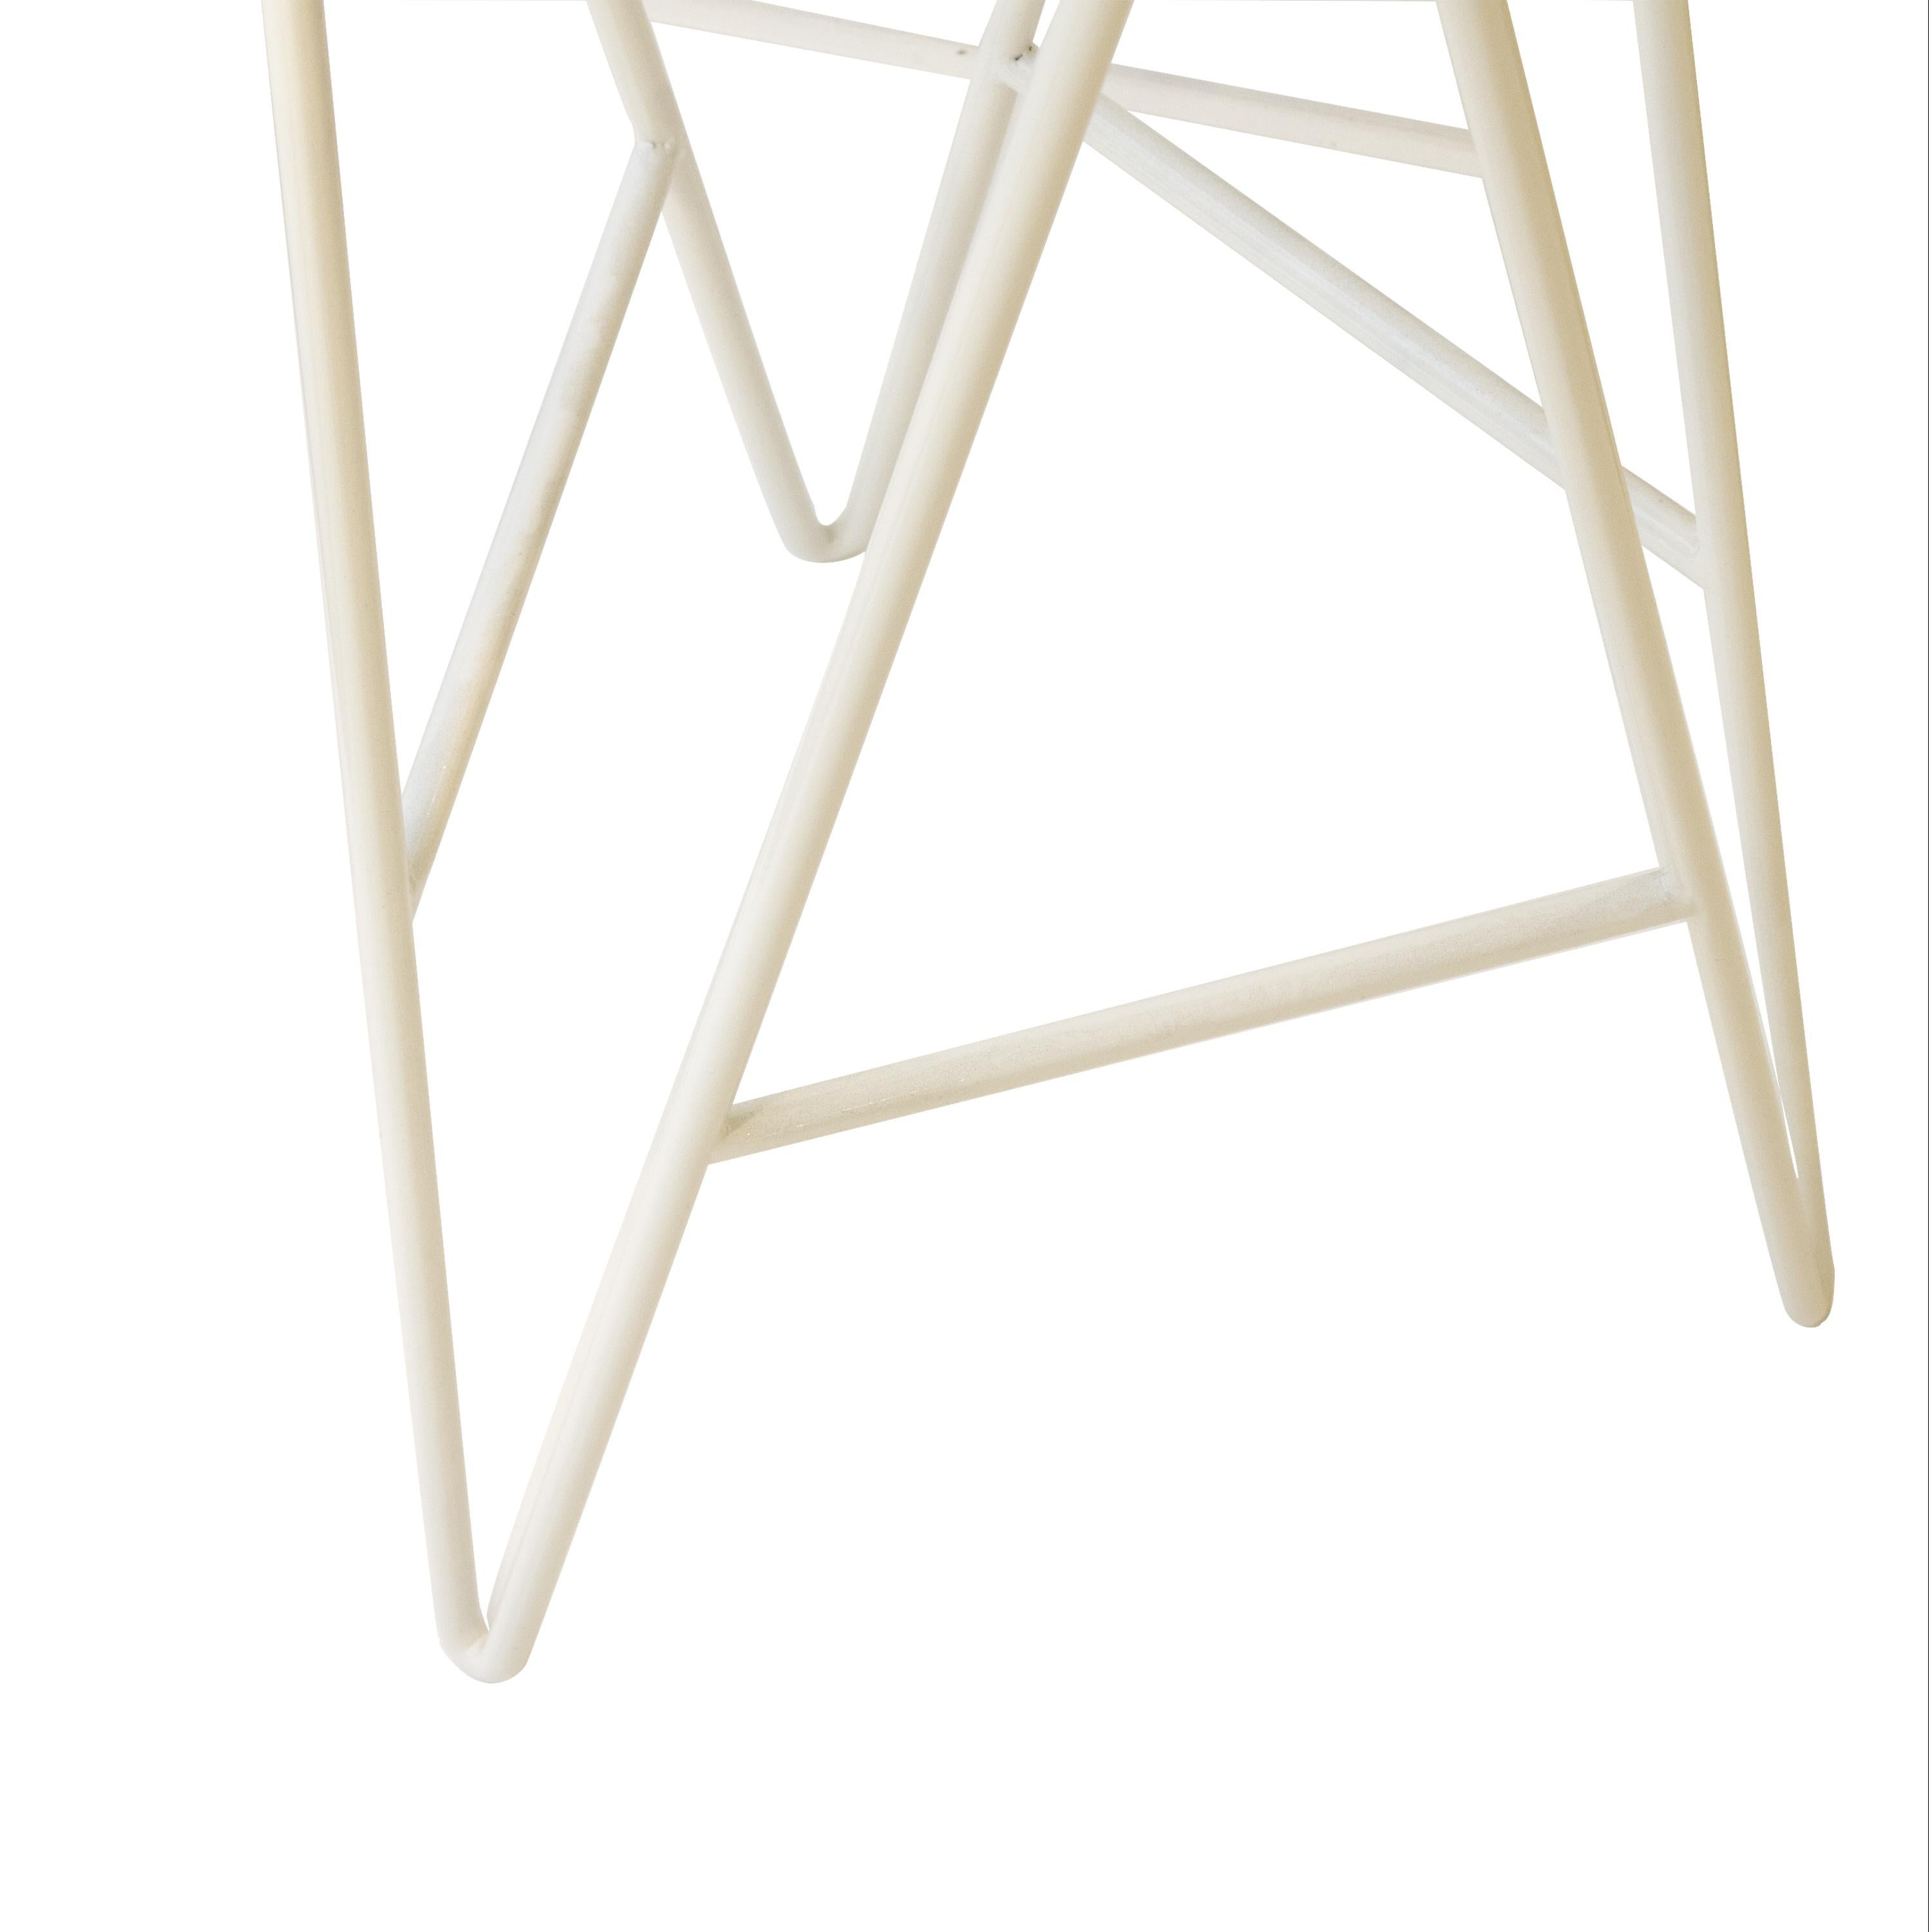 Contemporary Steel Stool Designed by Ikb191 Studio with Geometric Pattaron, Spain 2022 For Sale